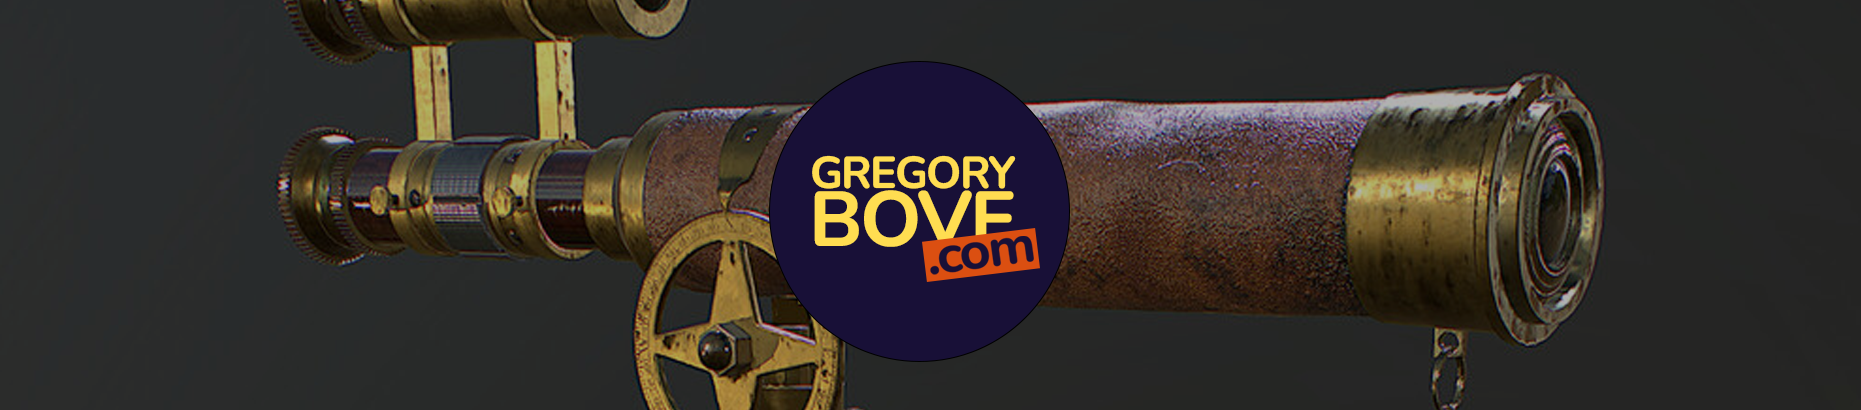 Gregory BOVE's profile banner